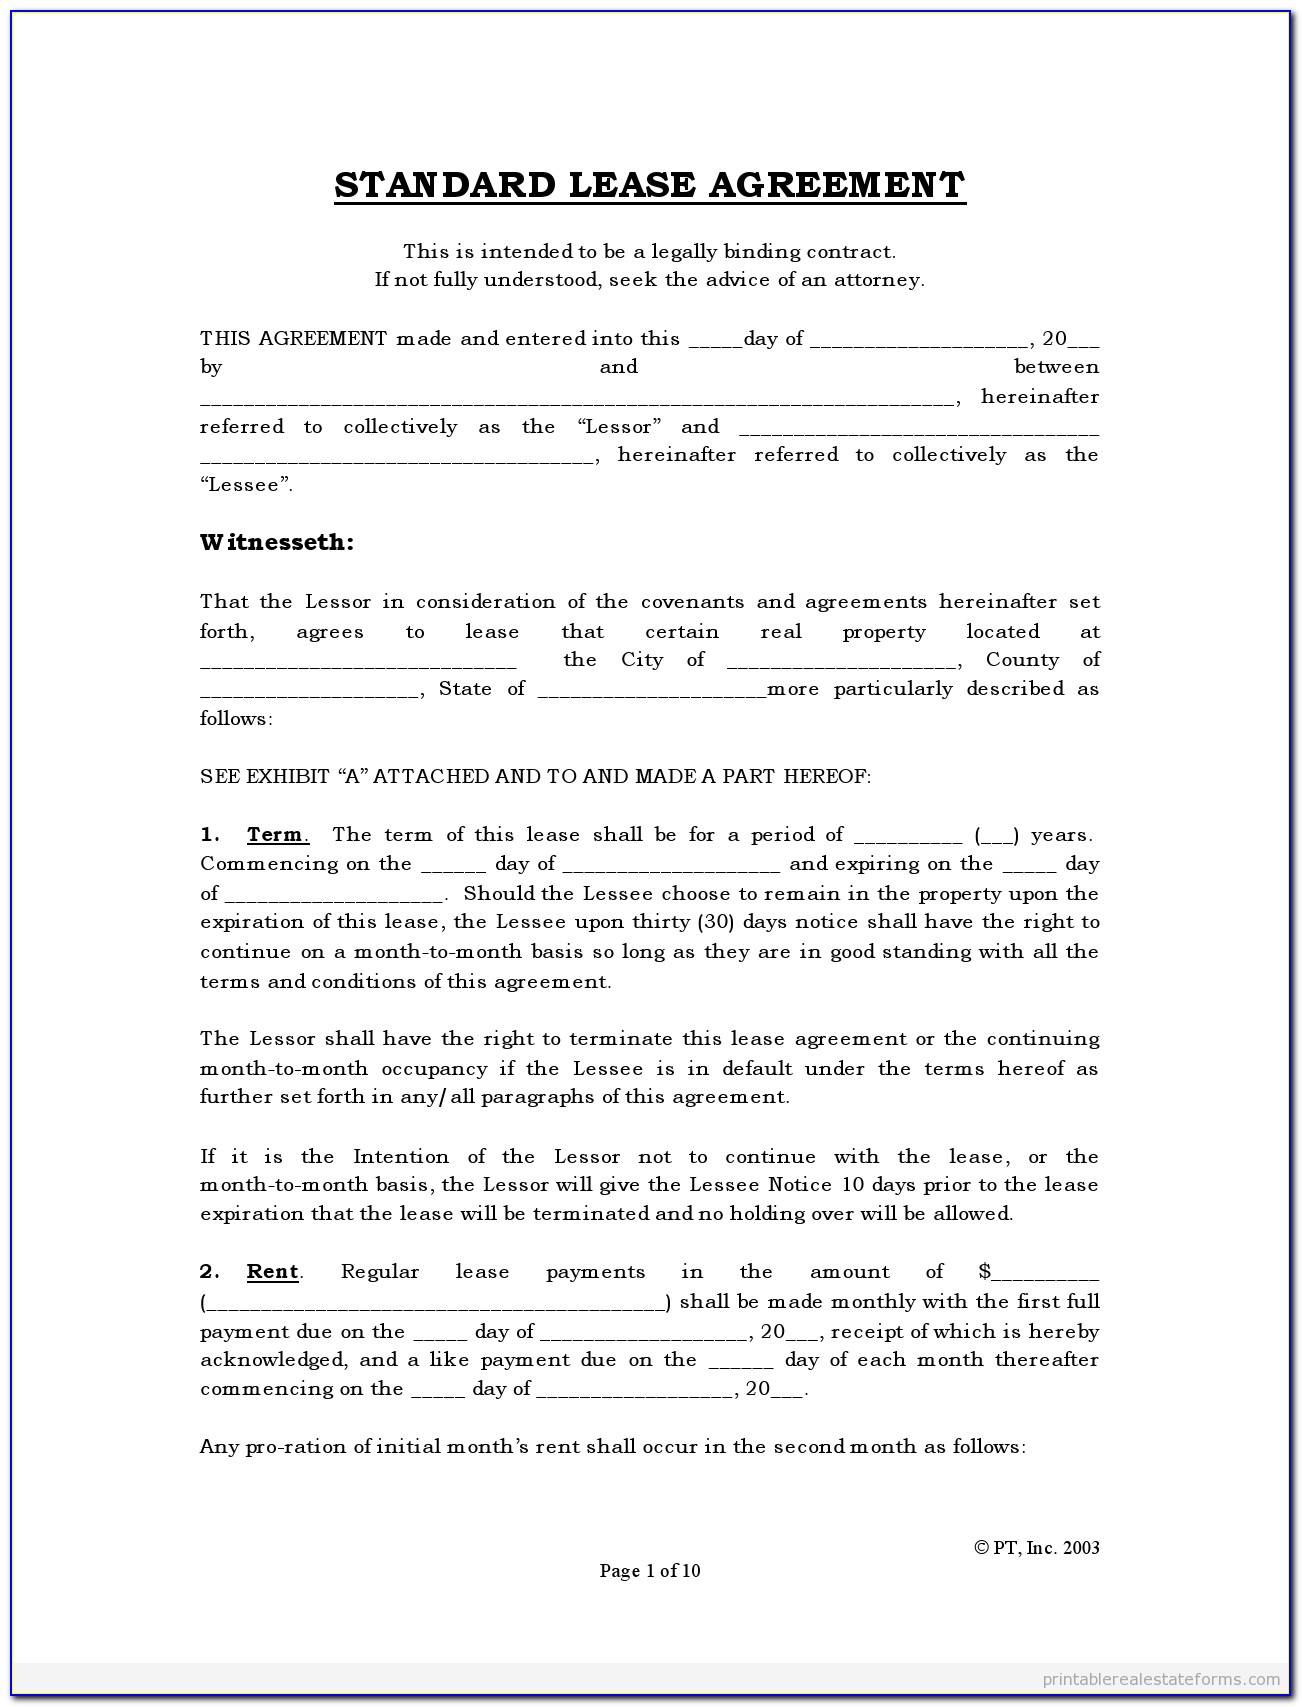 texas-lease-agreement-form